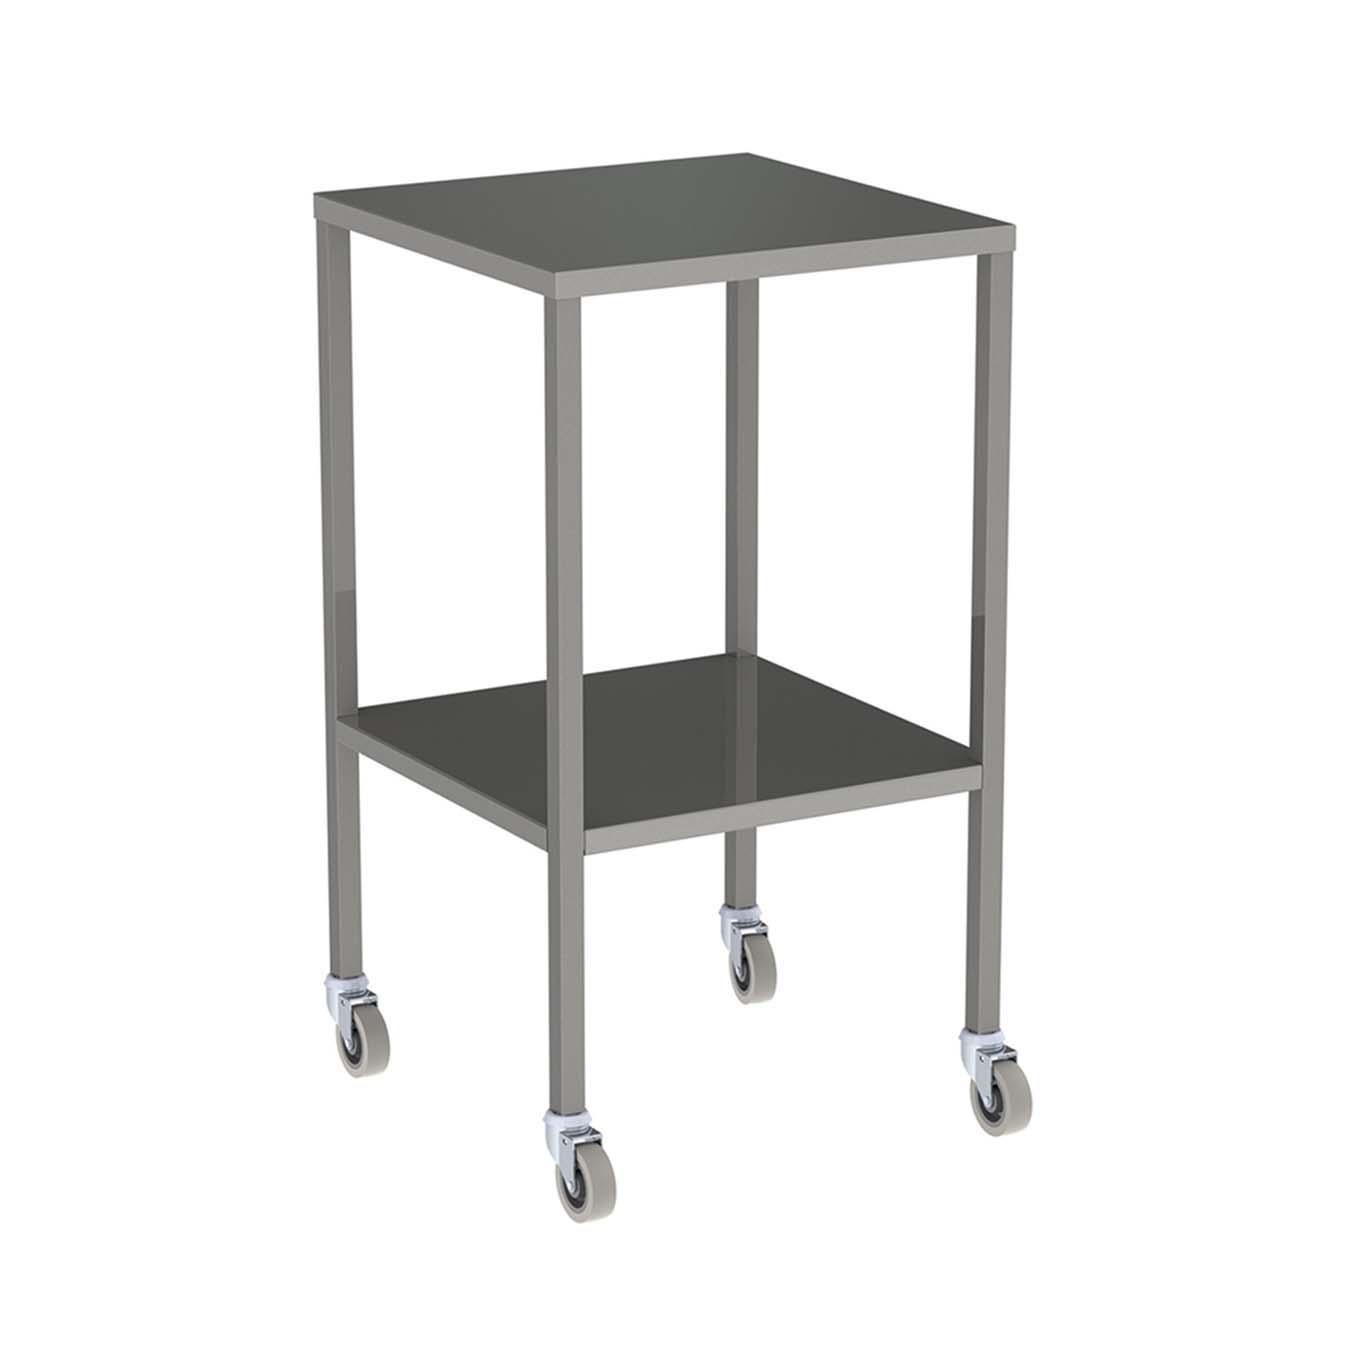 AX001_1_Dressing-Trolley-No-Rail-Stainless-Steel_490x490x900mm_1